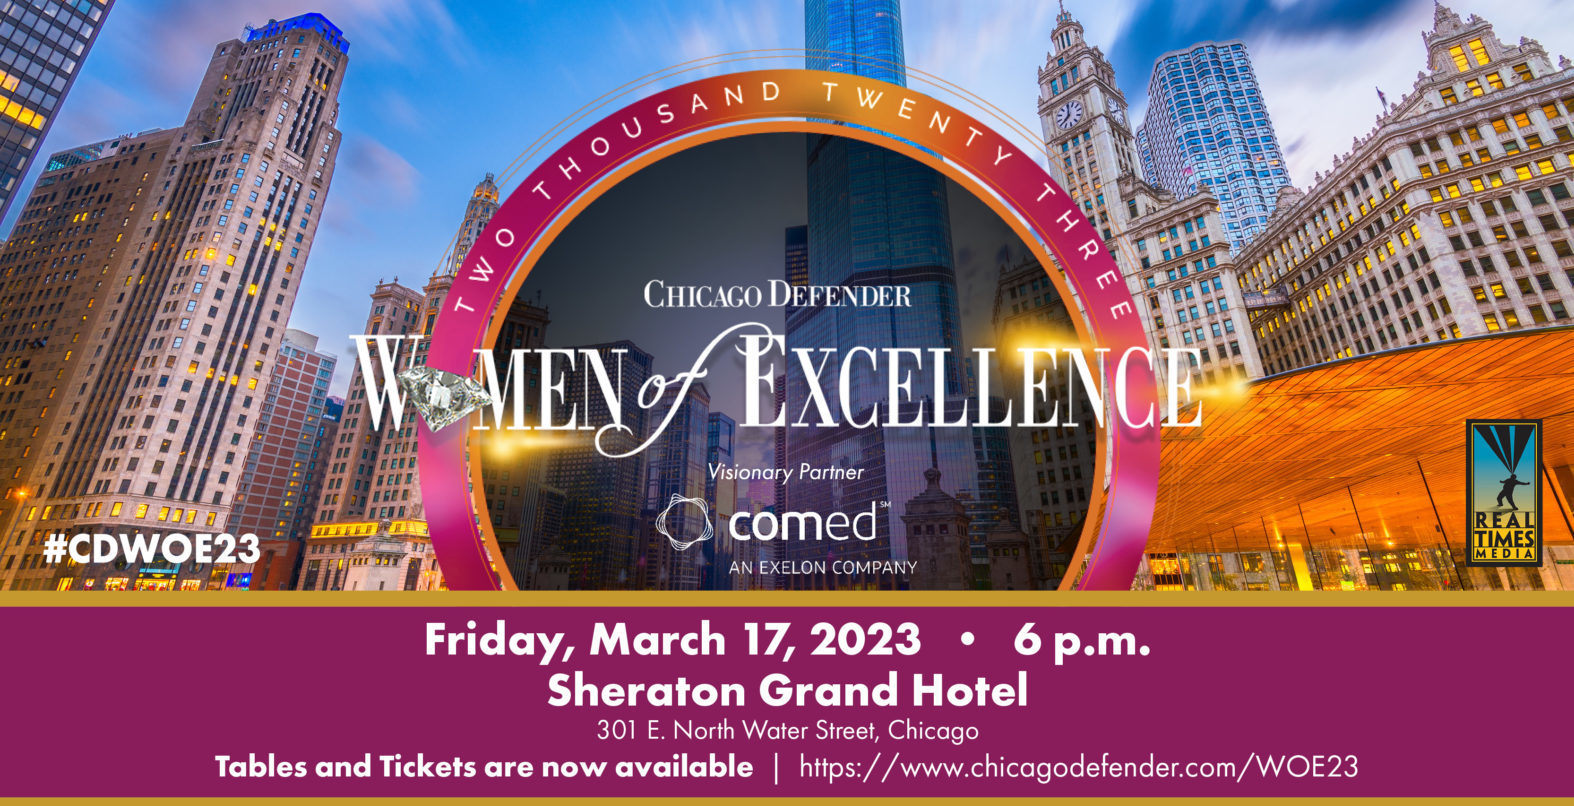 Introducing the 2023 Women of Excellence Honorees